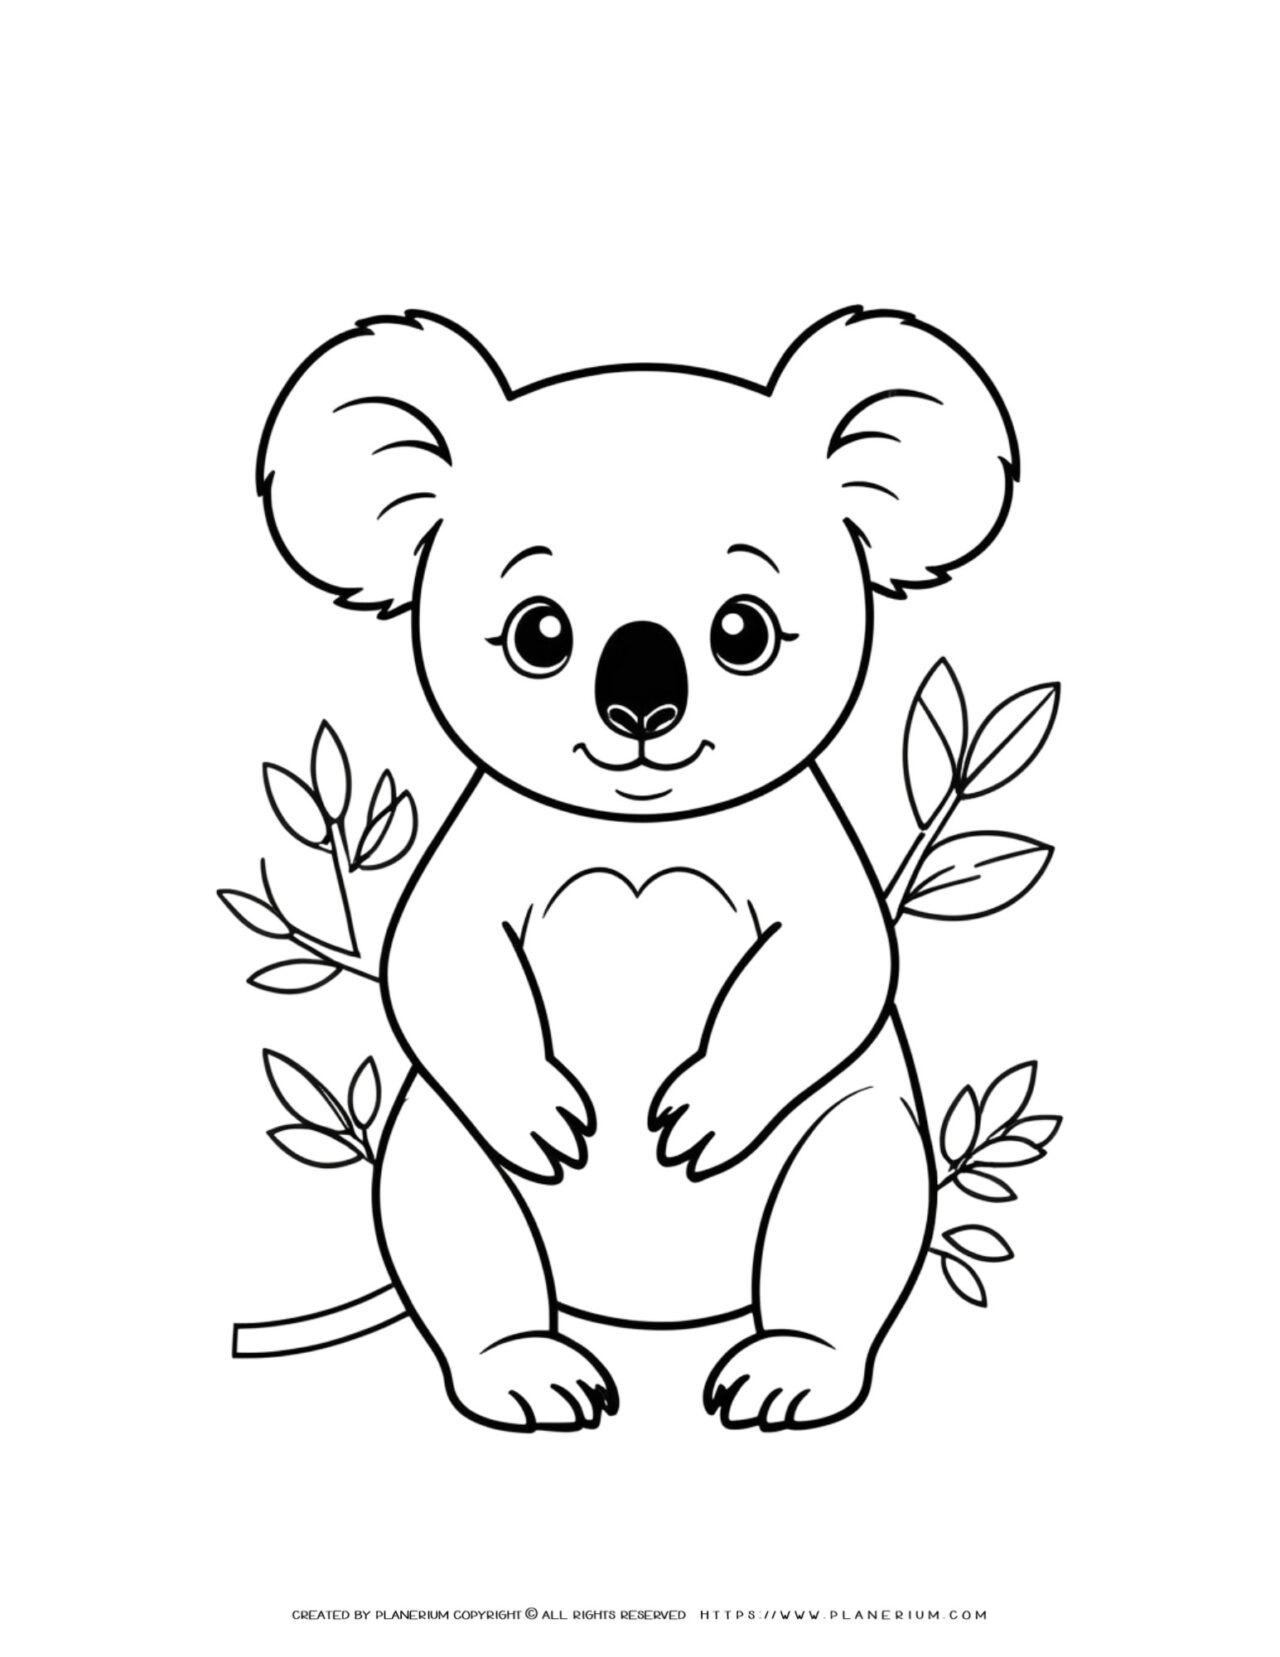 cute-koala-sitting-on-a-branch-coloring-page-for-kids